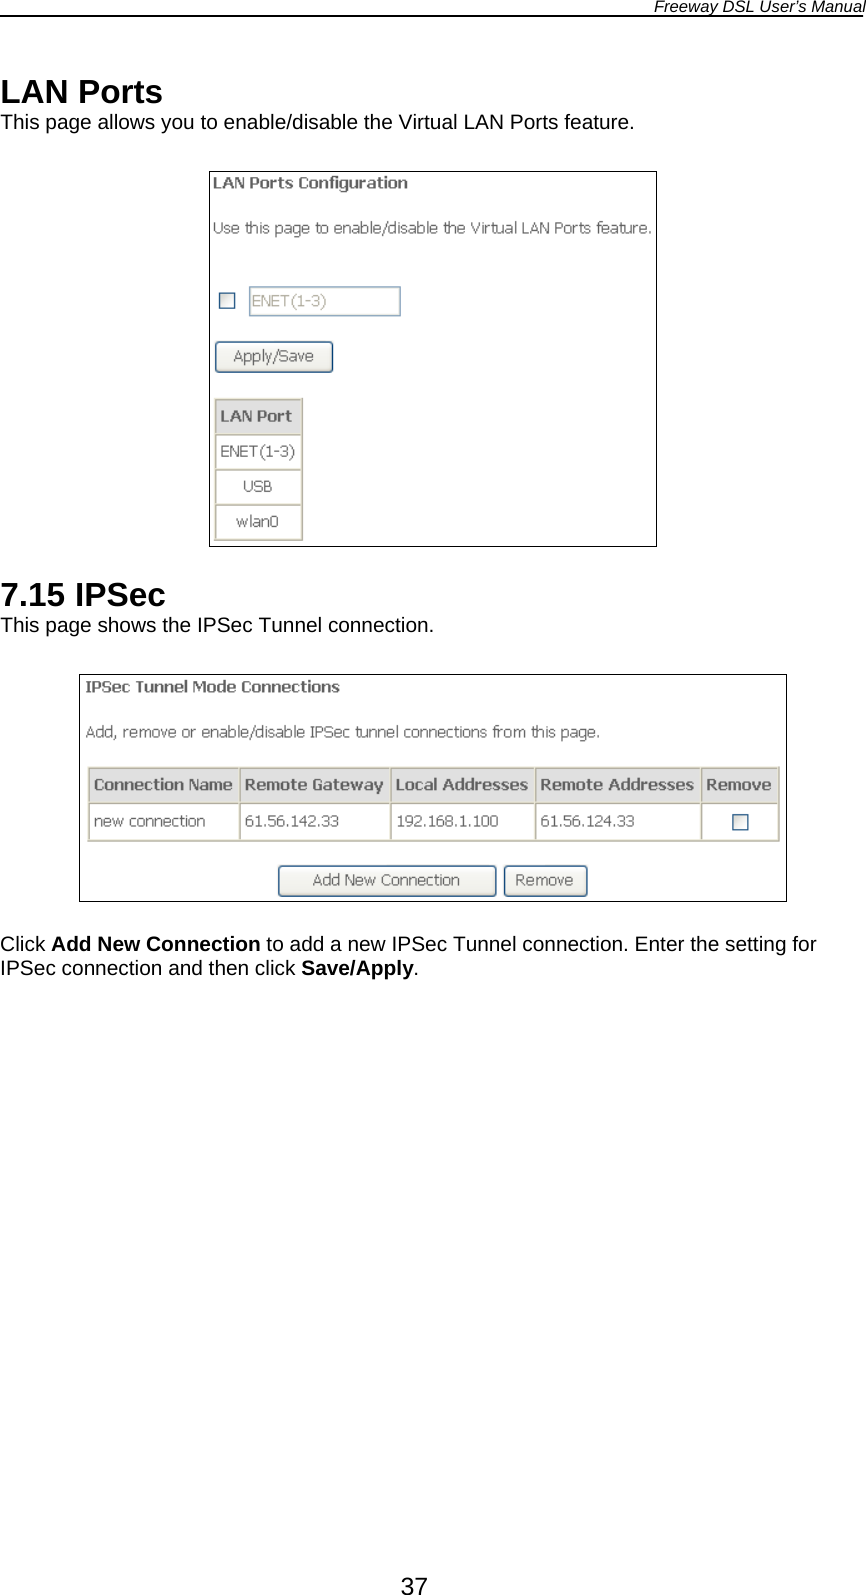 Freeway DSL User’s Manual  37 LAN Ports This page allows you to enable/disable the Virtual LAN Ports feature.     7.15 IPSec This page shows the IPSec Tunnel connection.    Click Add New Connection to add a new IPSec Tunnel connection. Enter the setting for IPSec connection and then click Save/Apply.  